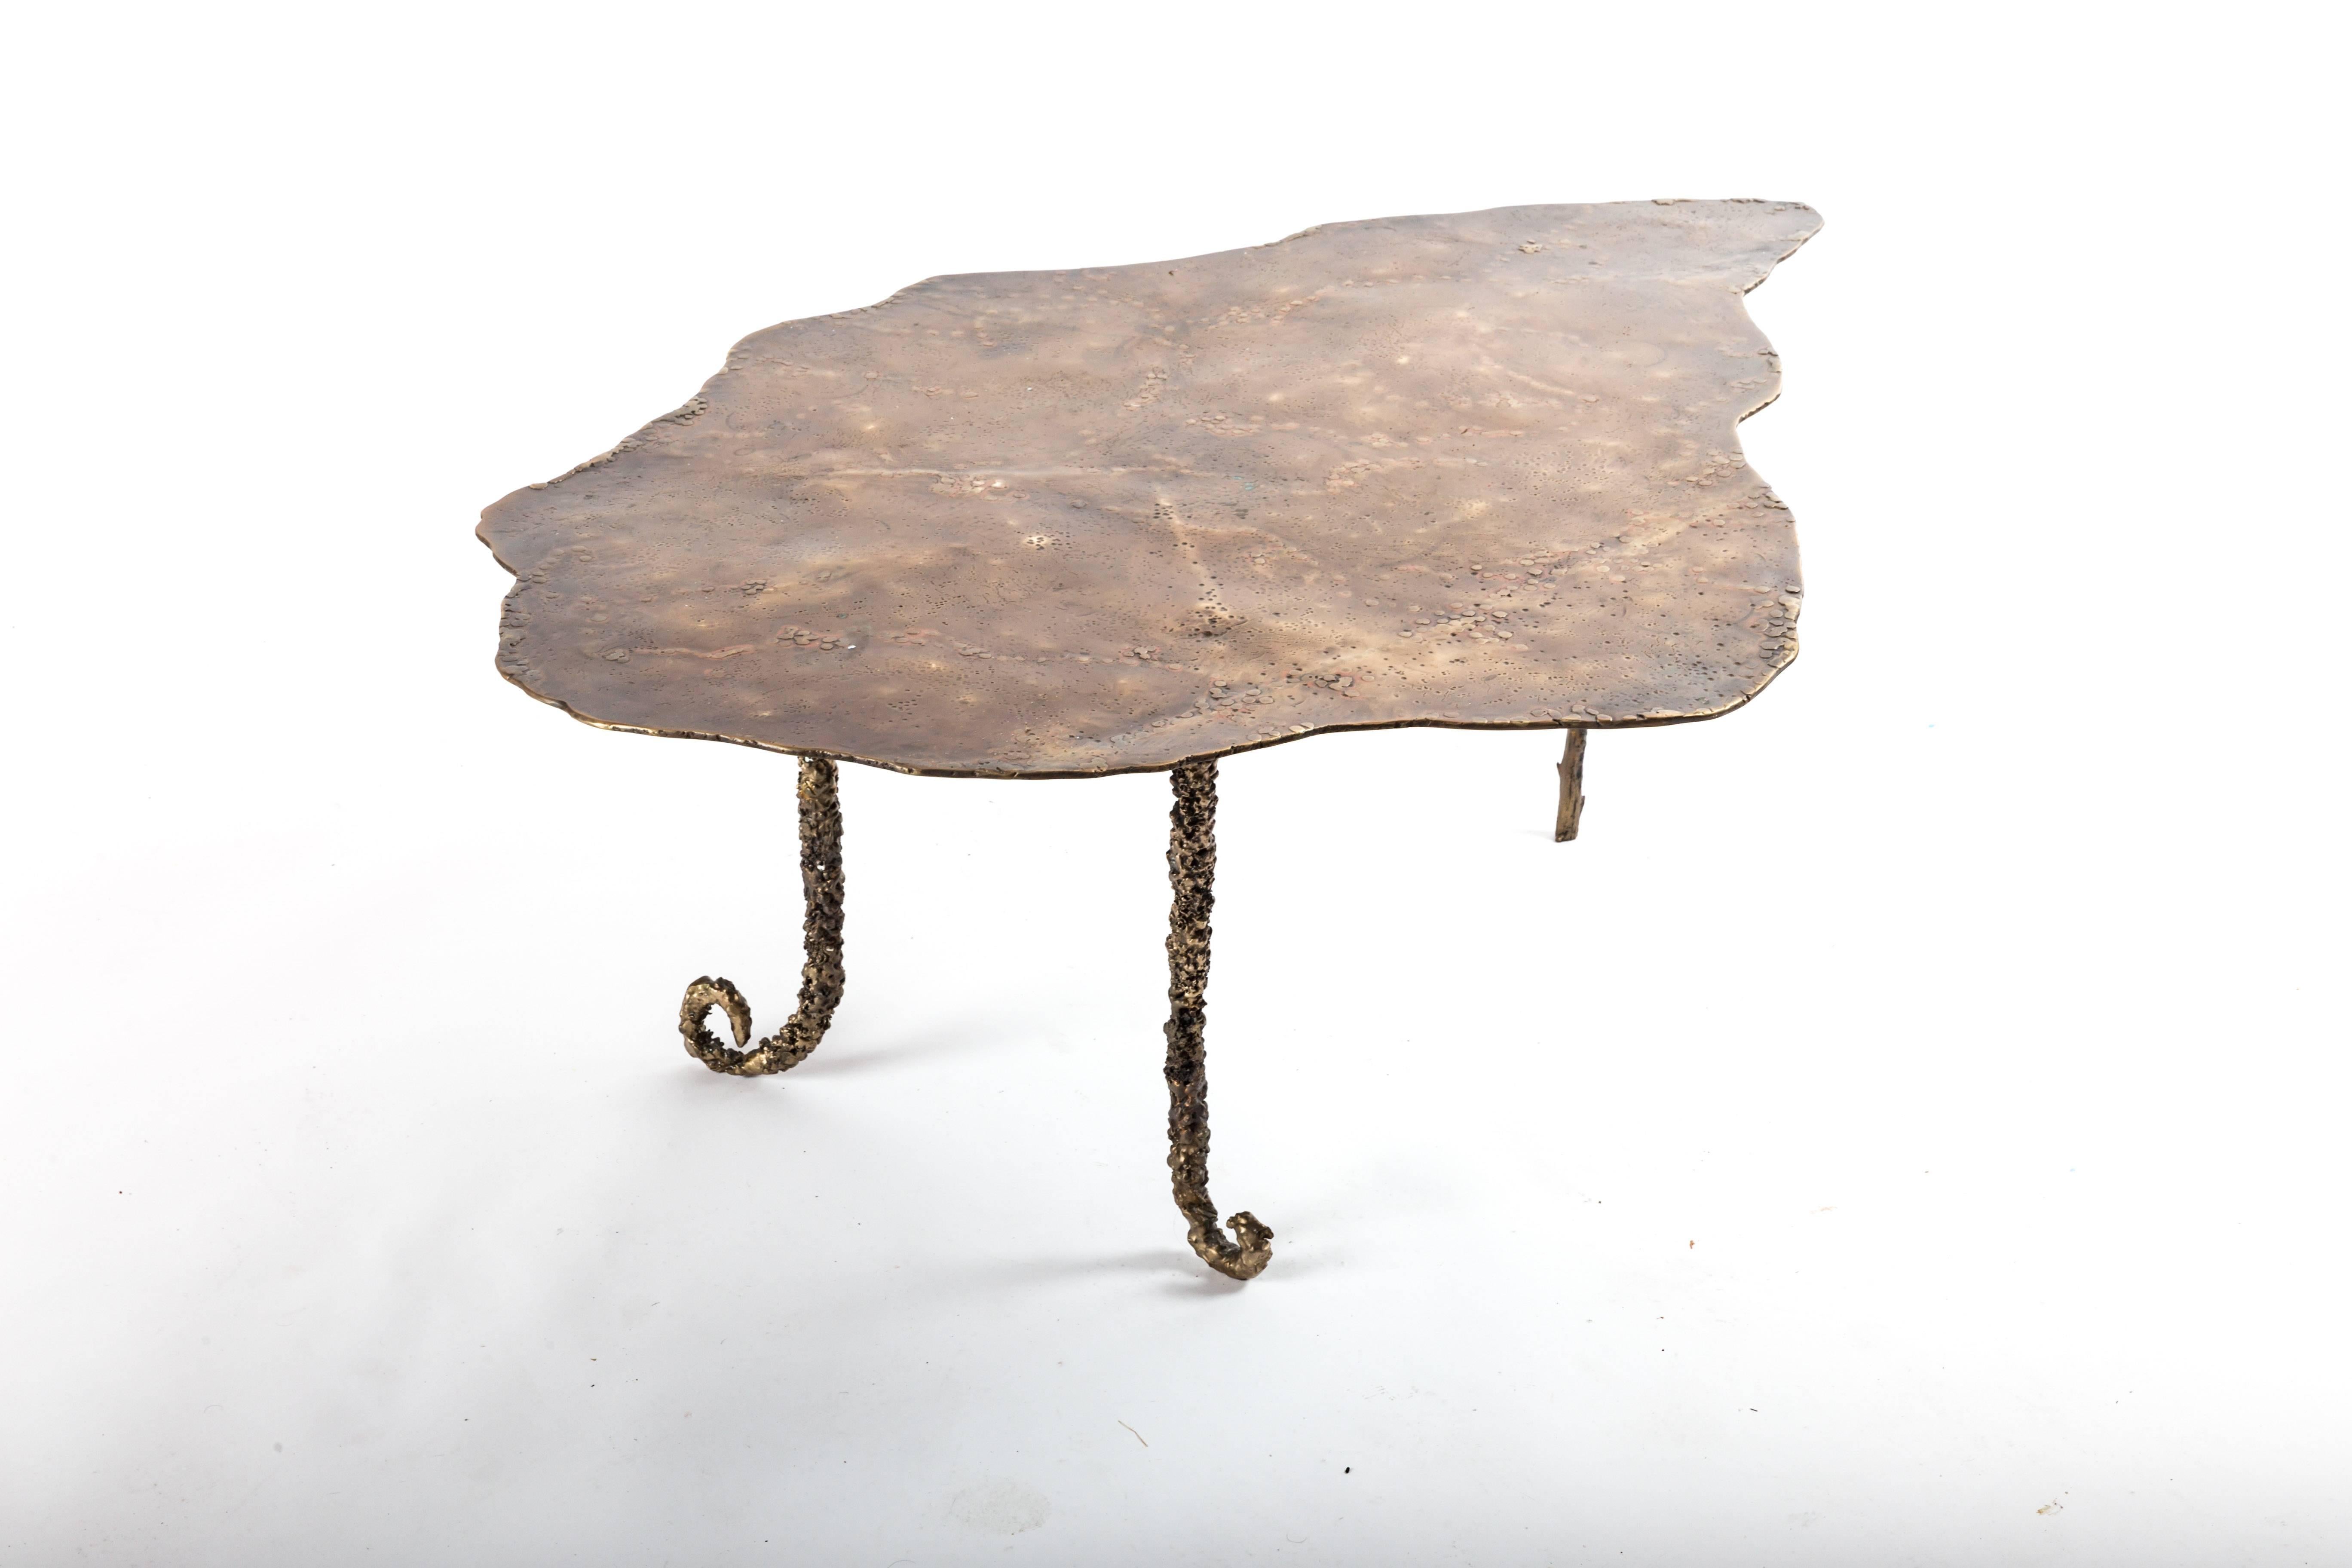 Custom-made cast bronze coffee table. Designed by Athena Calderone and crafted by Vanessa Monk of Monk Designs. The base of the table was inspired and cast from actual plant stalks found in nature, giving the legs their amazing nubby tactile